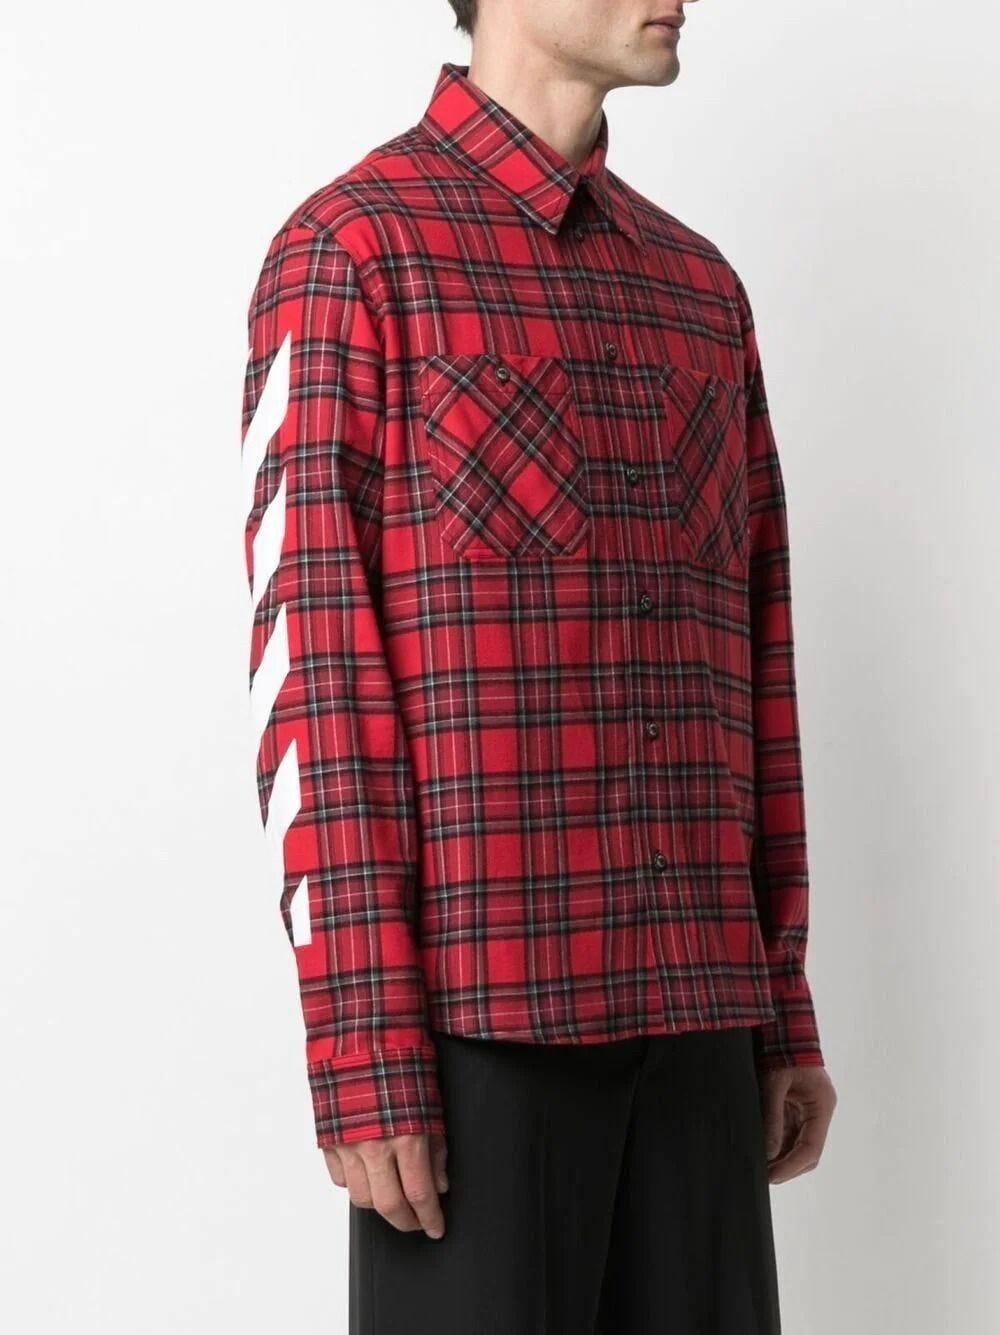 Off-White c/o Virgil Abloh Diag Checked Flannel Shirt in Red for